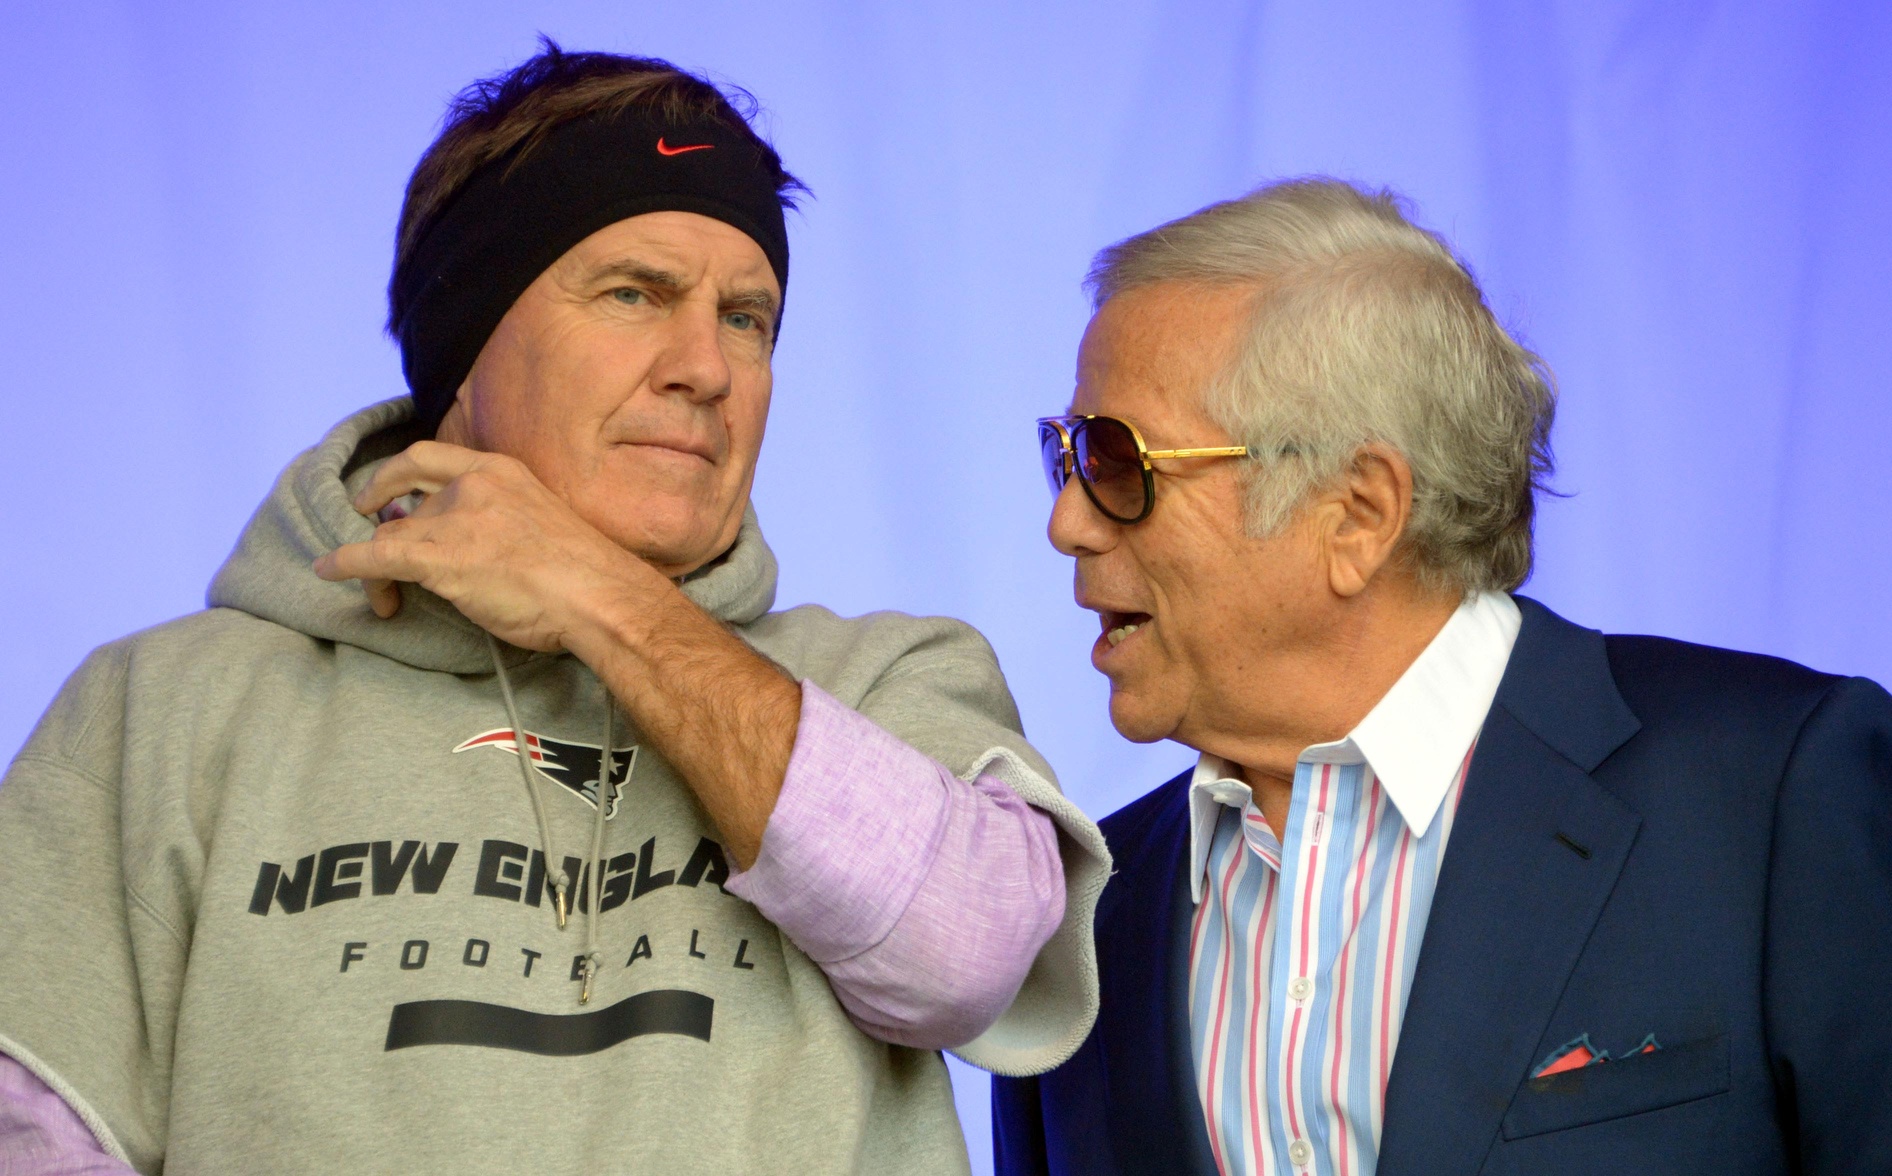 Patriots Owner Says Putin Stole His Super Bowl Ring, Changes Tune When He  Realizes Putin Is Scary